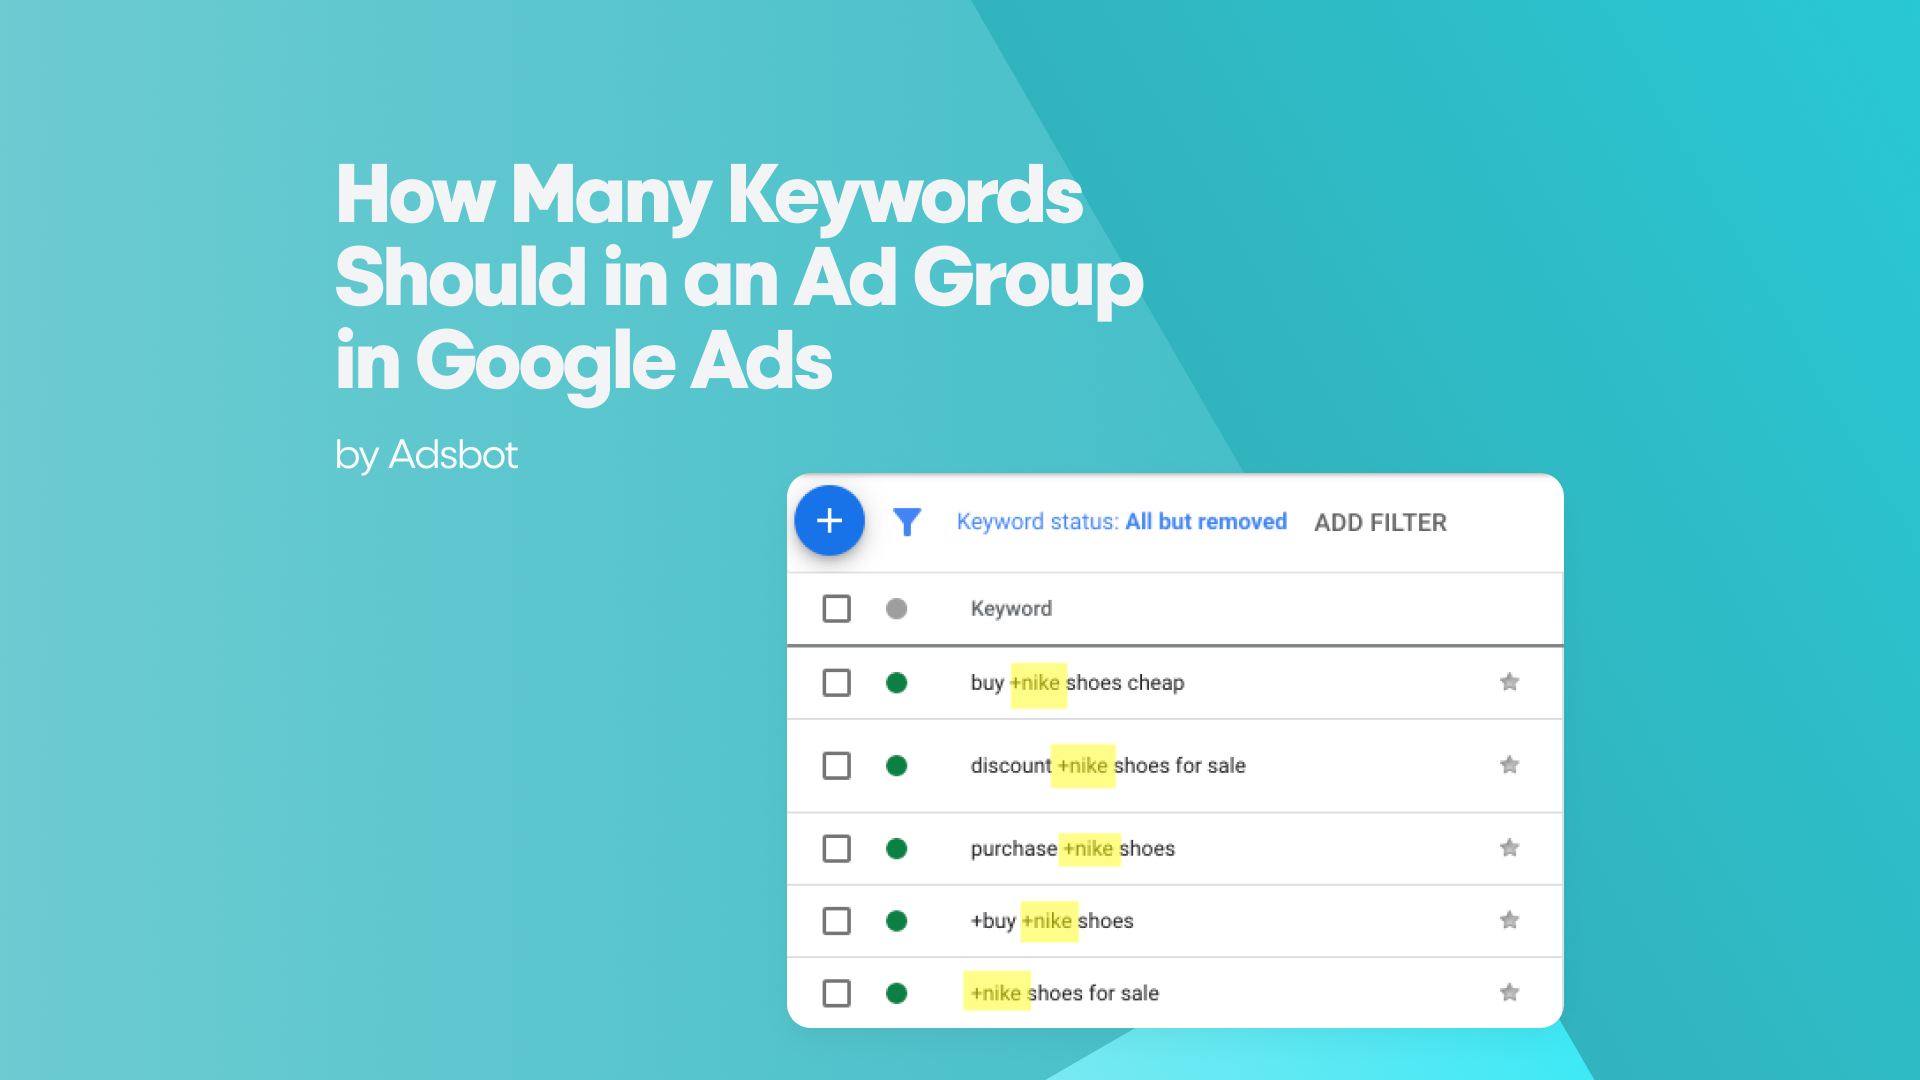 How Many Keywords Should in an Ad Group in Google Ads?